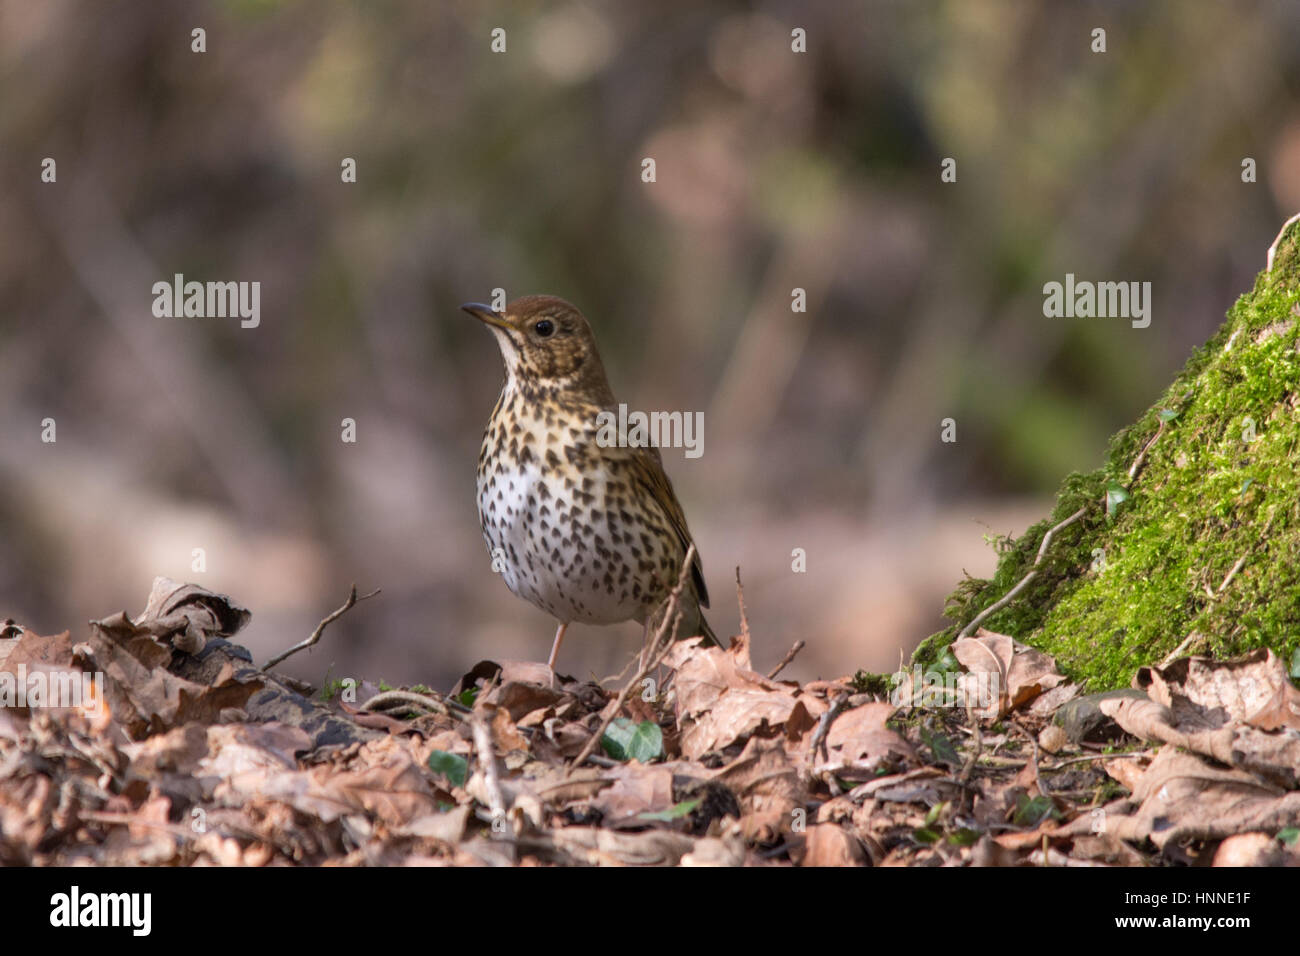 Song thrush (Turdus philomelos) among dry leaves Stock Photo